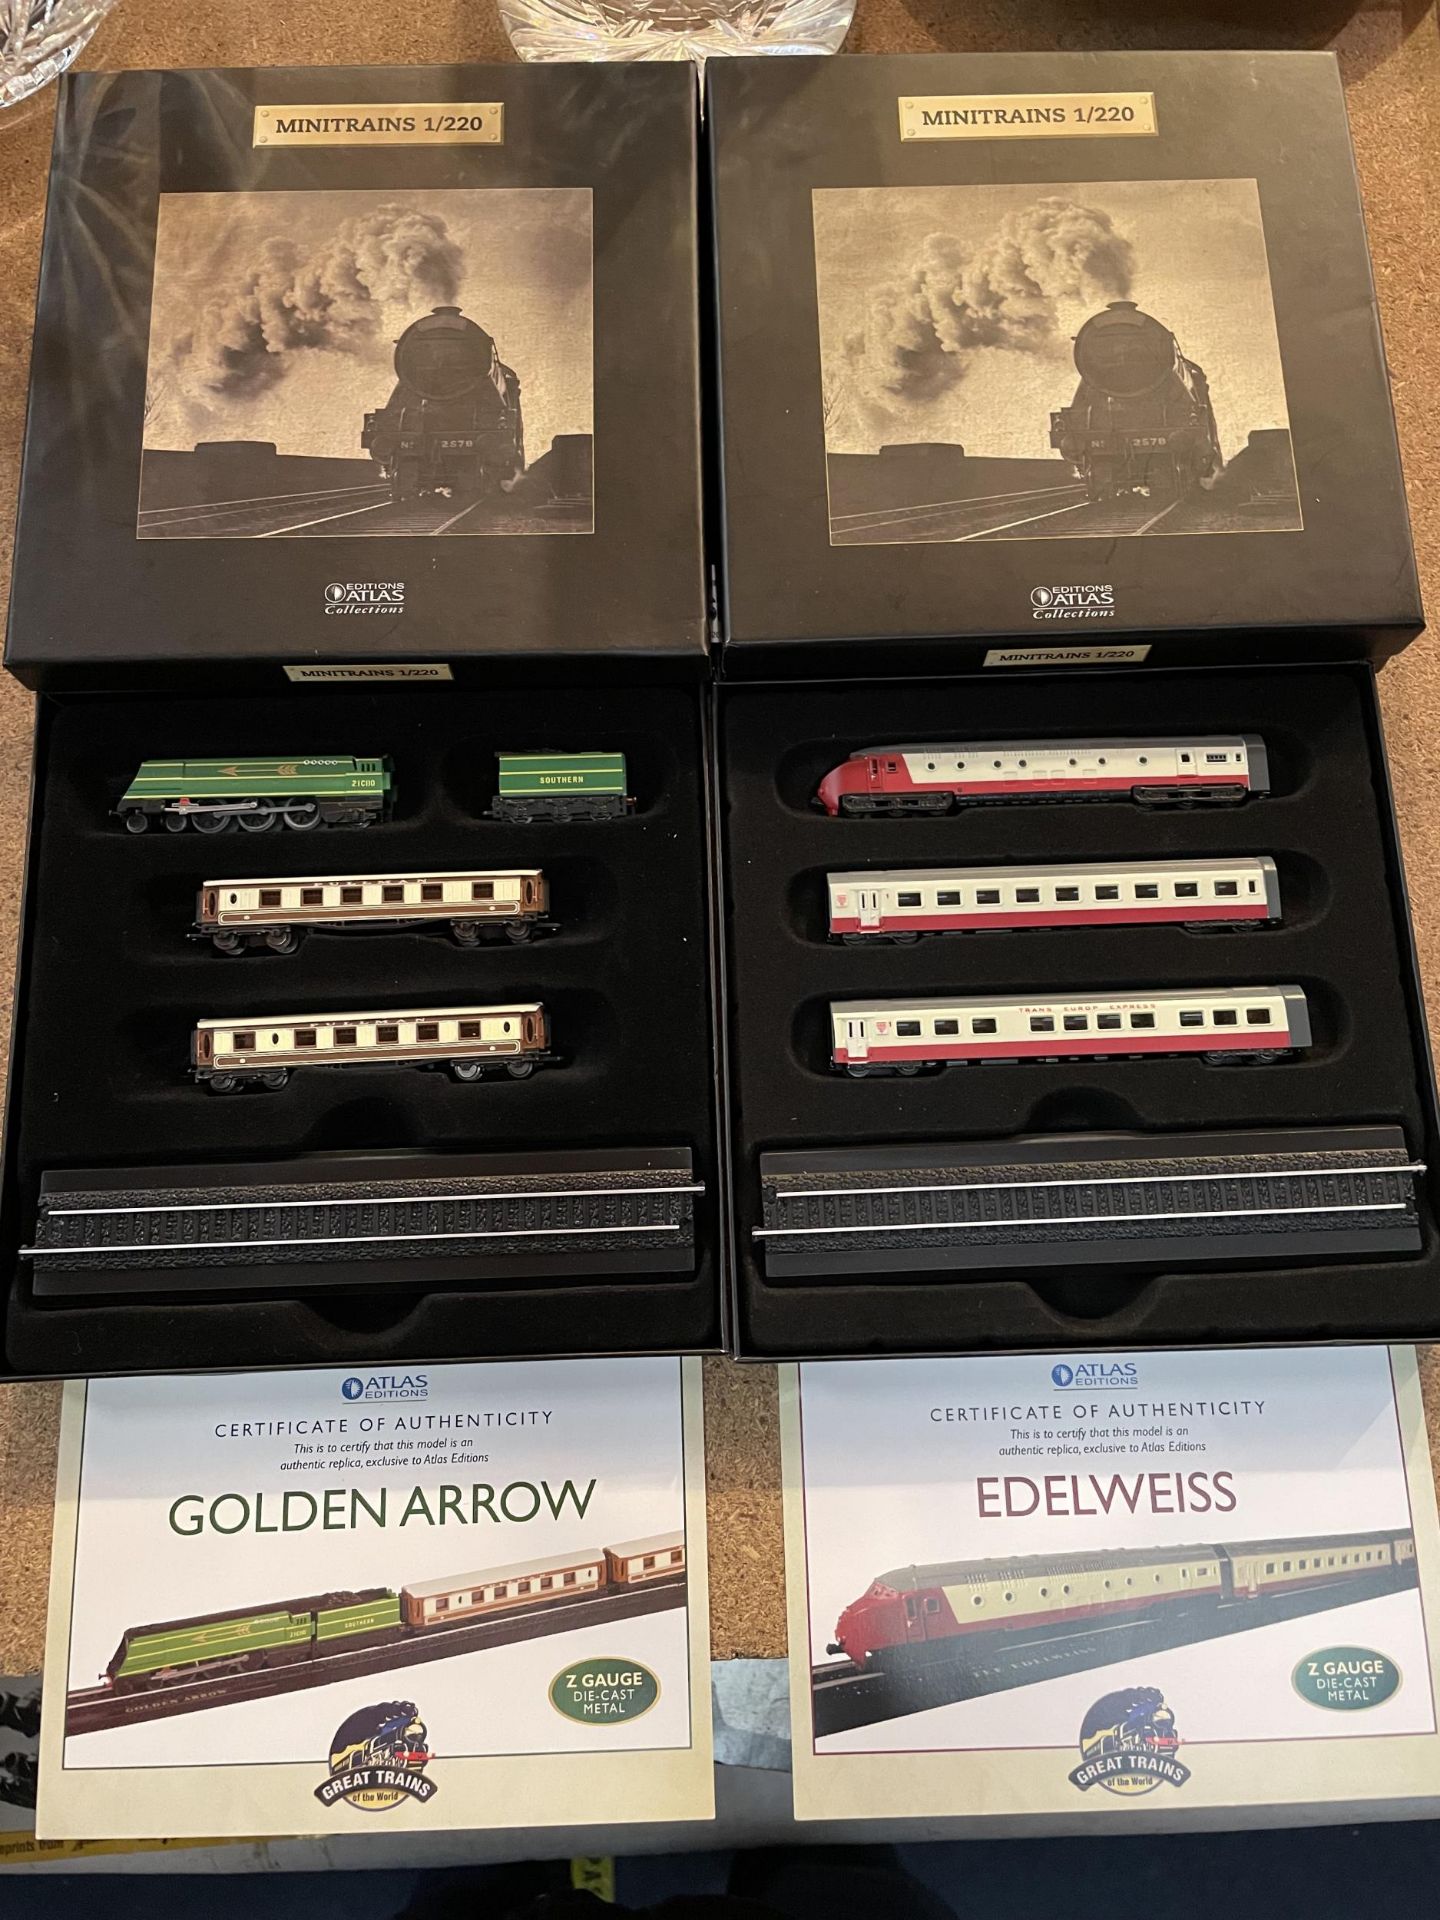 TWO MINI TRAINS SCALE 1/220 TO INCLUDE EDELWEISS AND GOLDEN ARROW